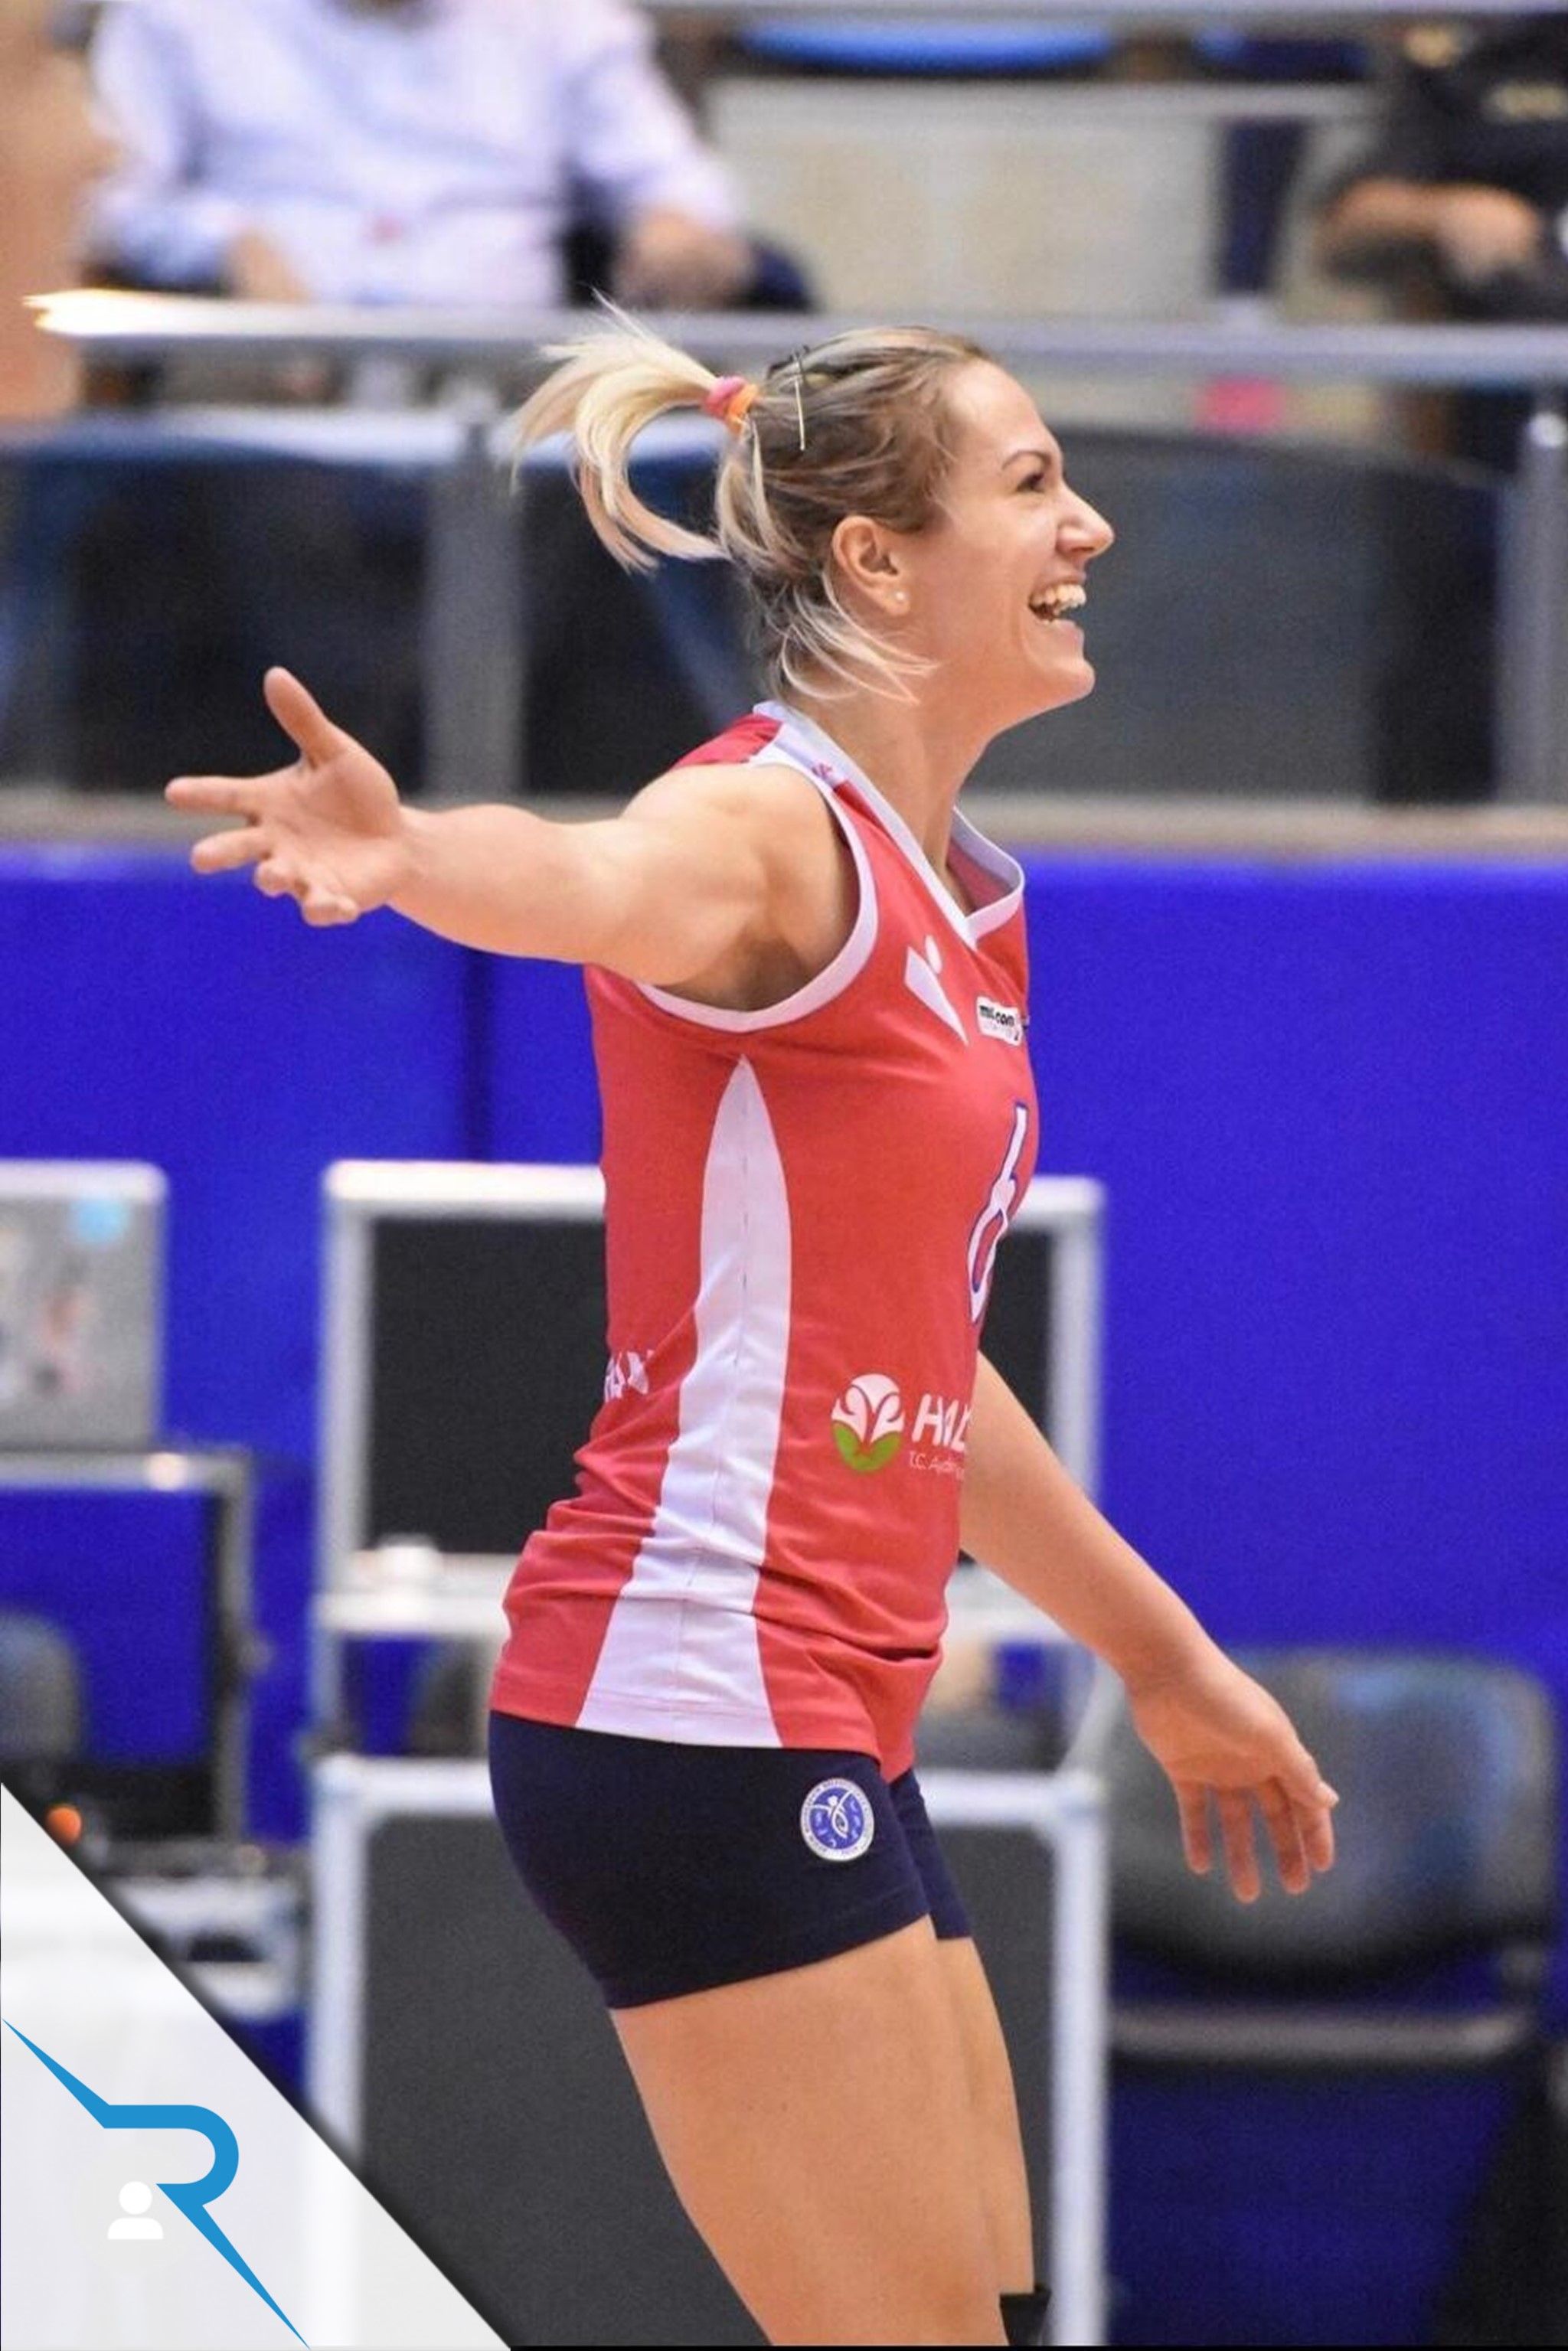 Cresta successfully represented Dutch national team captain Maret Grothues at the Court of Arbitration for Sport